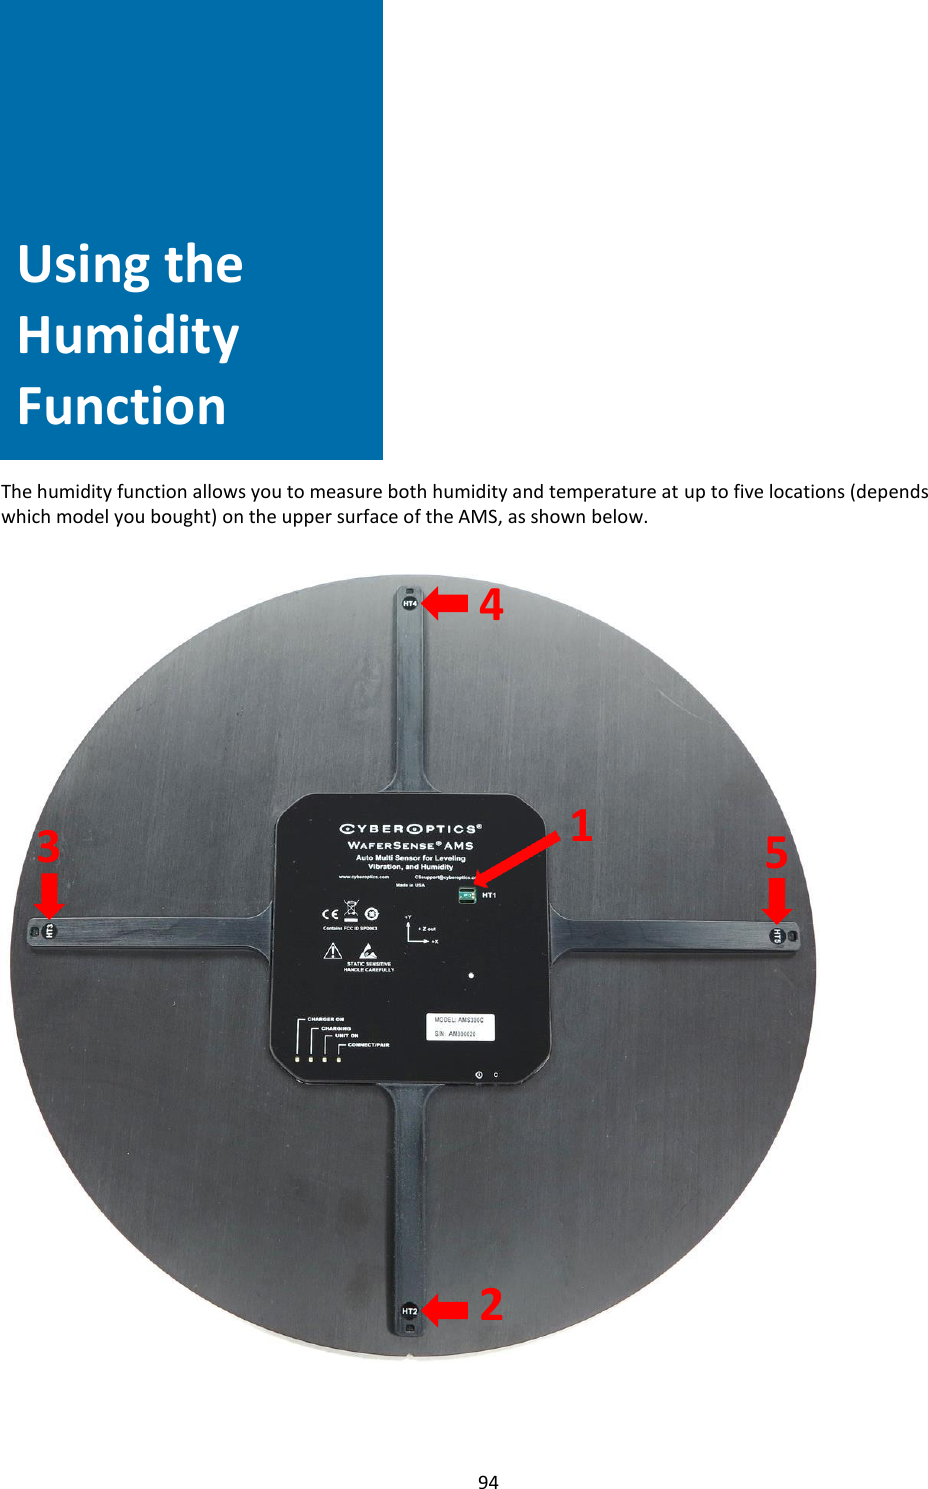   94                Using the Humidity Function    The humidity function allows you to measure both humidity and temperature at up to five locations (depends which model you bought) on the upper surface of the AMS, as shown below.                                    Using the Humidity Function 1  2  3  5  4  